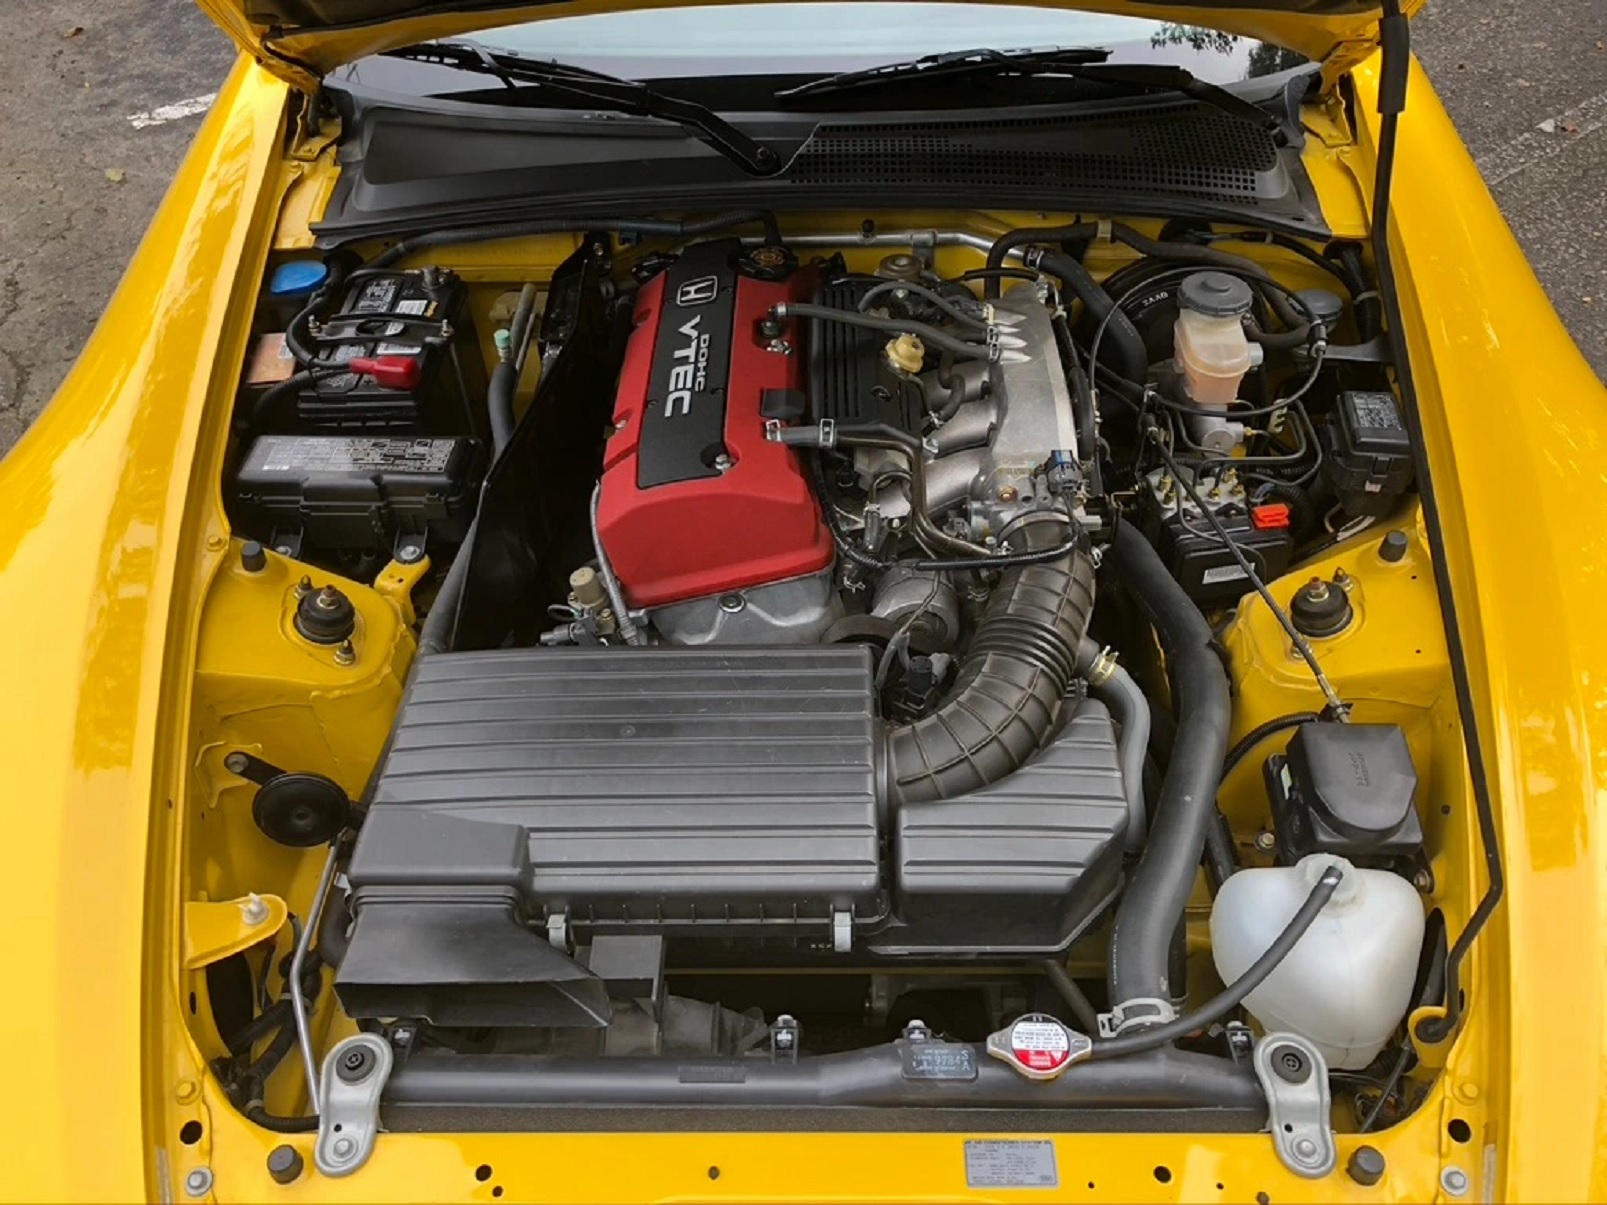 Is Bathroom Cleaner Effective in Cleaning Your Car's Engine Bay?